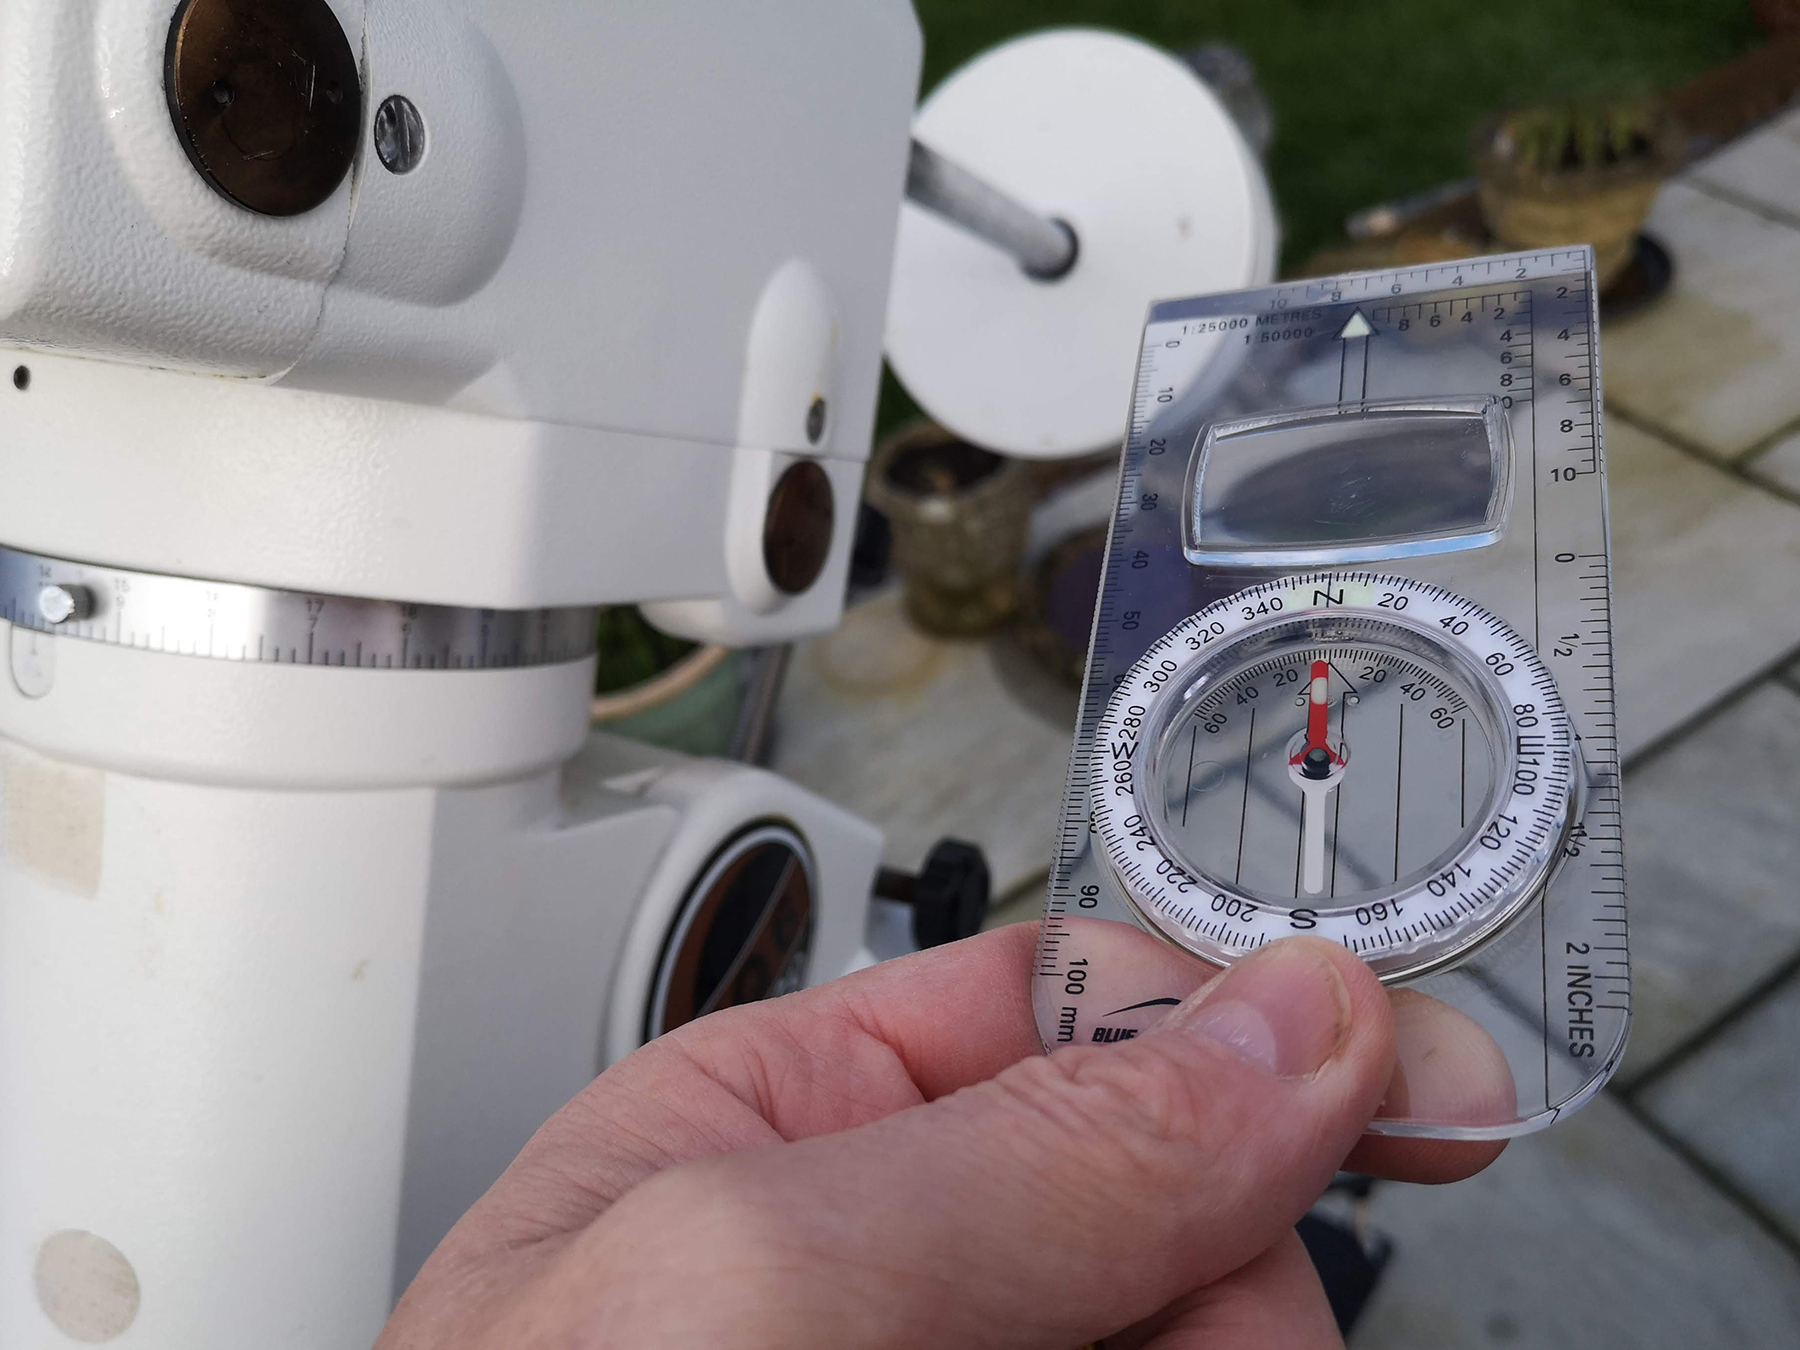 How to polar align an equatorial mount safely using the Sun. Credit: Dave Eagle